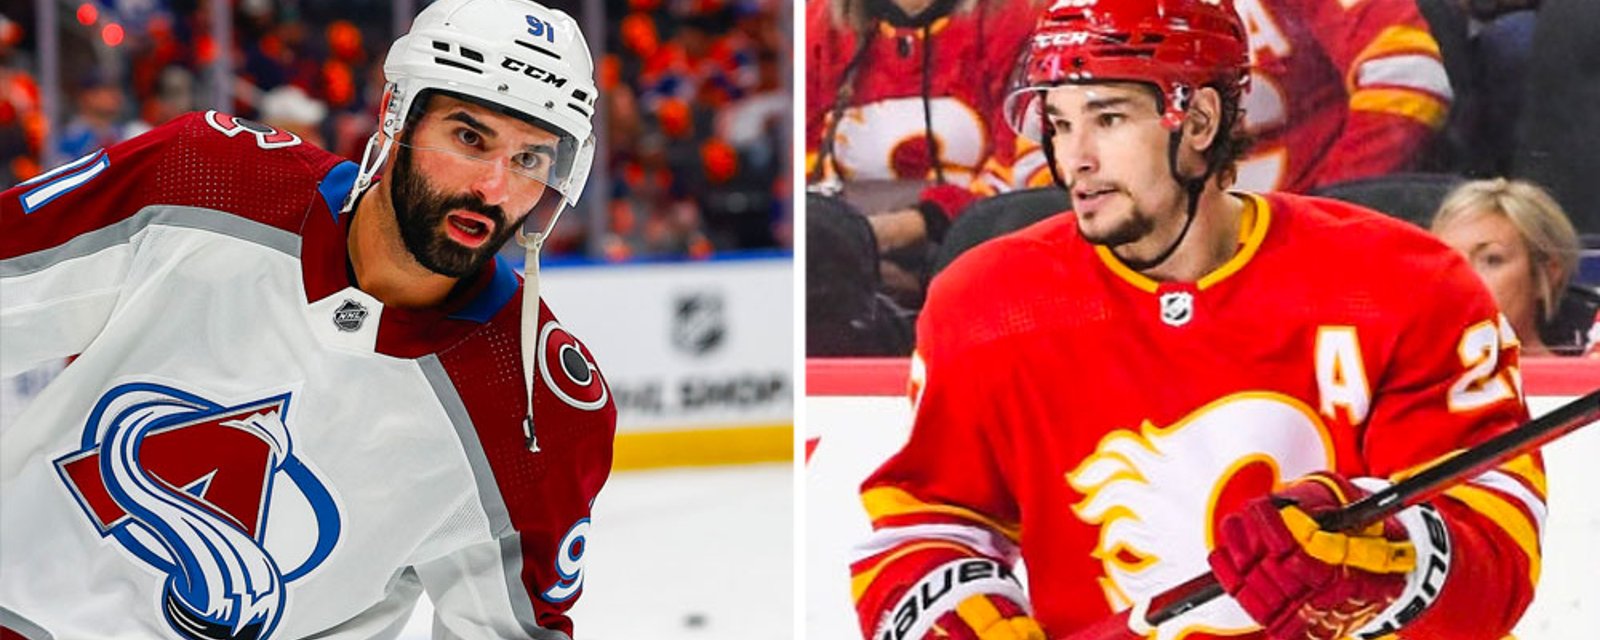 ICYMI: Kadri signs with the Flames, Monahan traded to the Habs